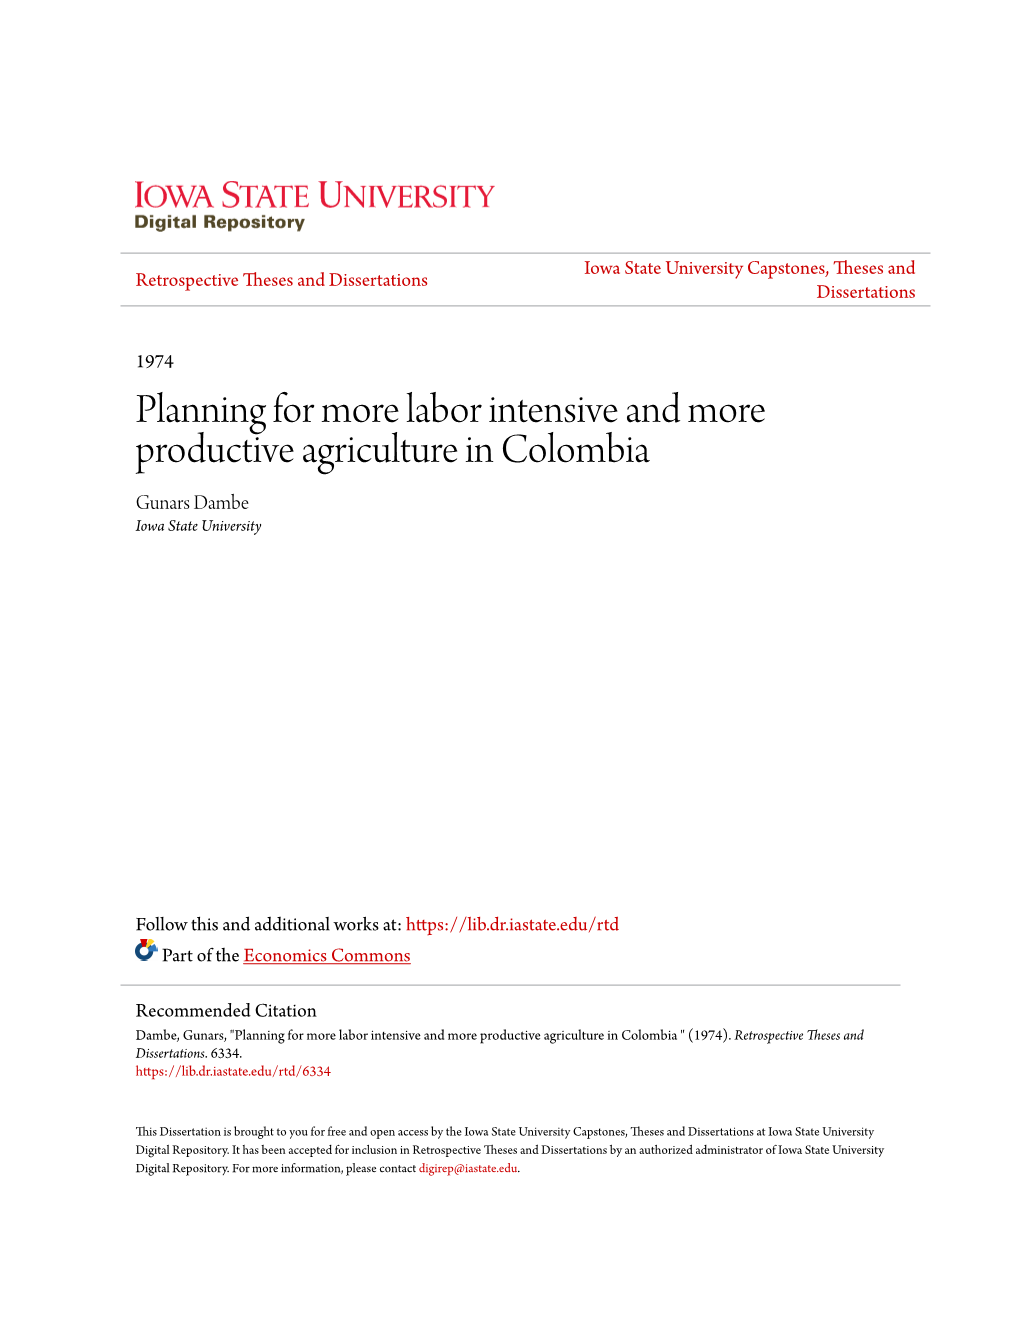 Planning for More Labor Intensive and More Productive Agriculture in Colombia Gunars Dambe Iowa State University